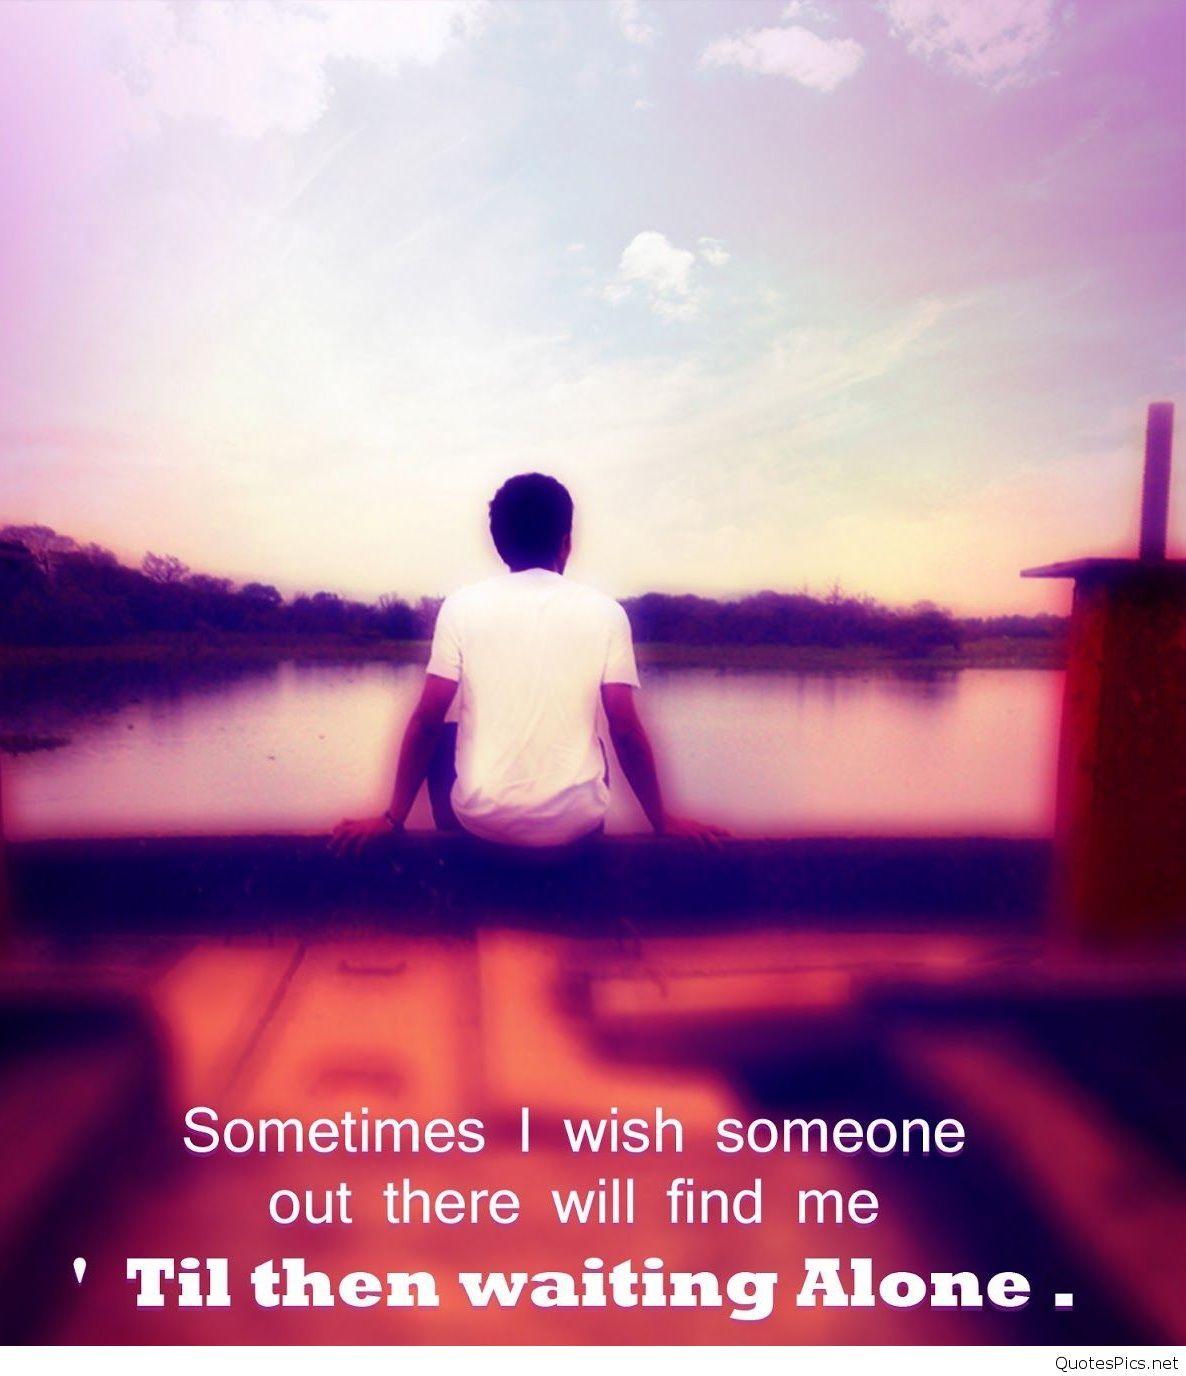 Background Very Sad Quotes Image Pics HD Top On Quote Emotional